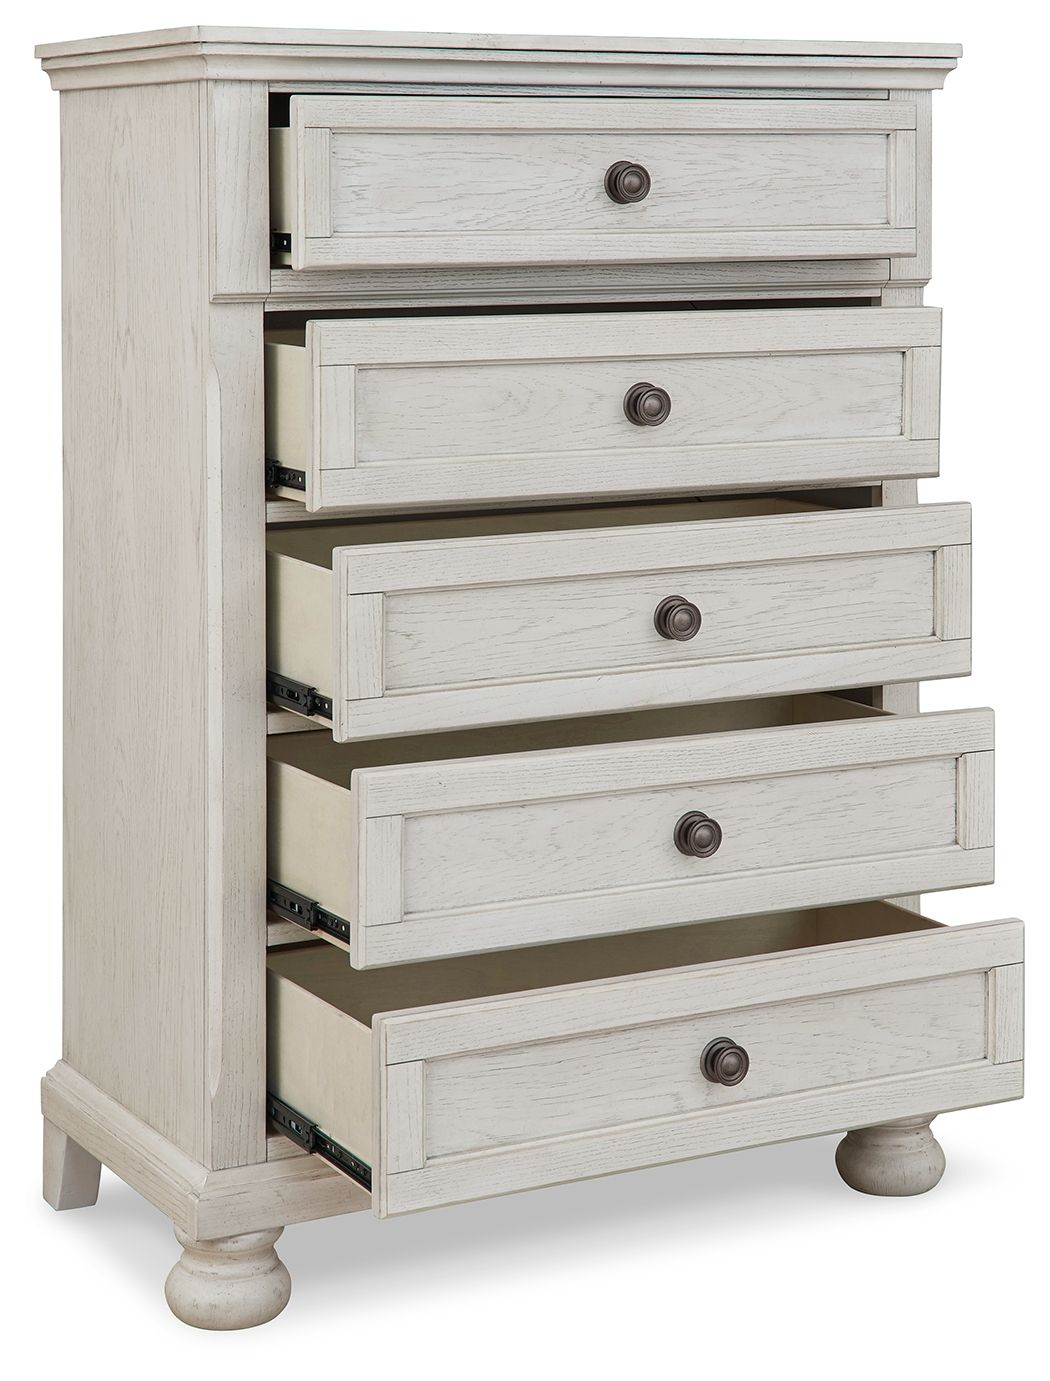 Robbinsdale - Antique White - Five Drawer Chest - Youth - Tony's Home Furnishings